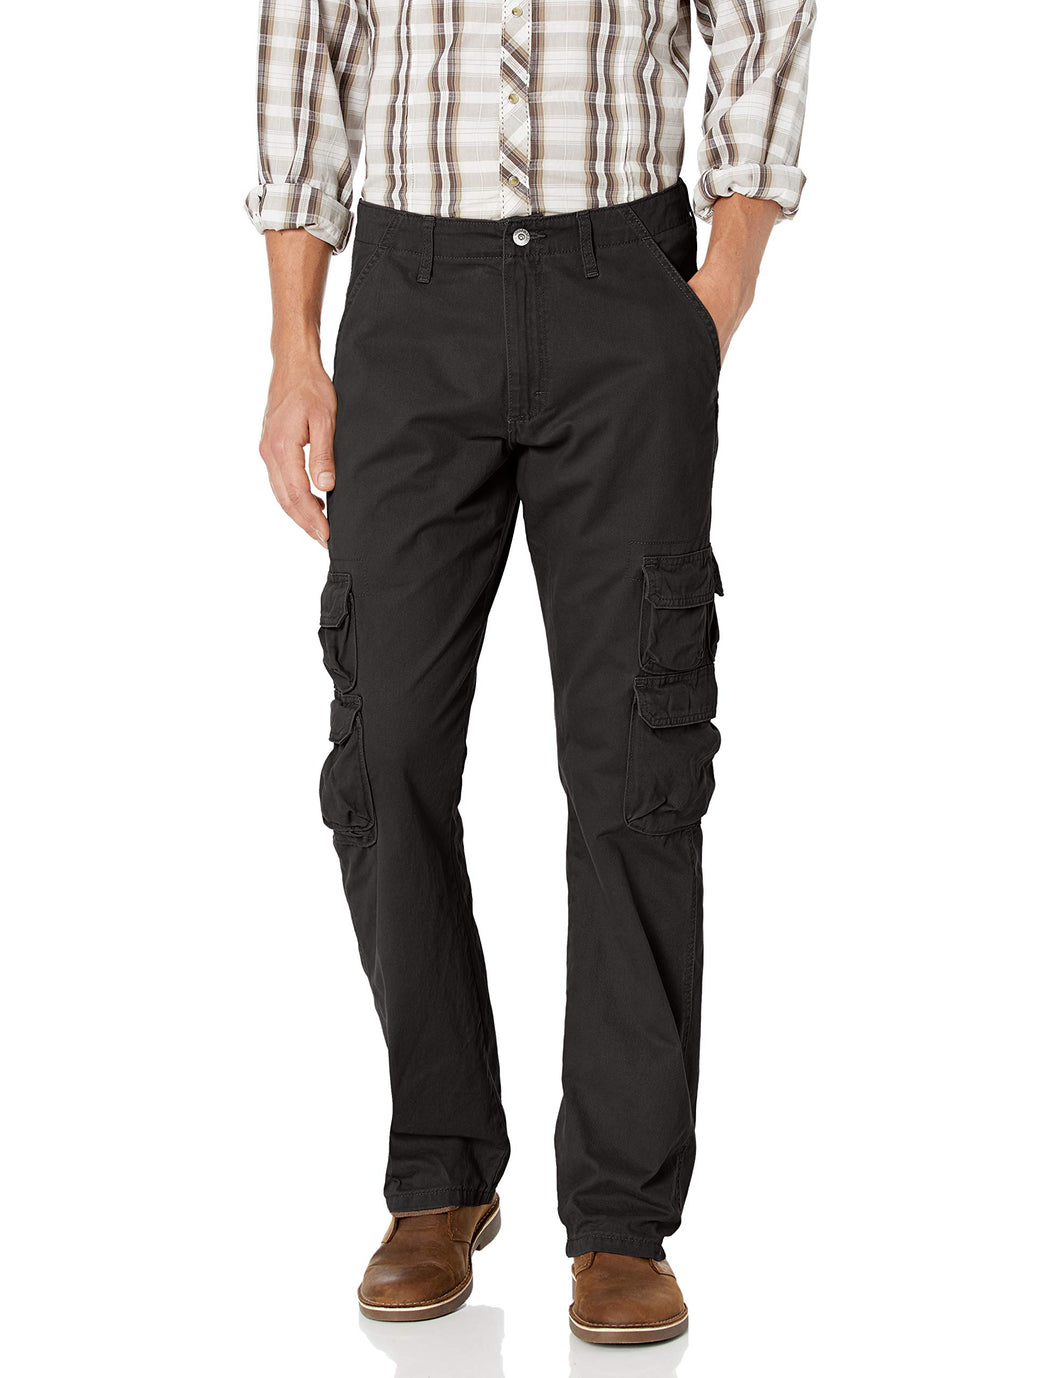 Men's Relaxed Fit Straight Leg Cargo Pants